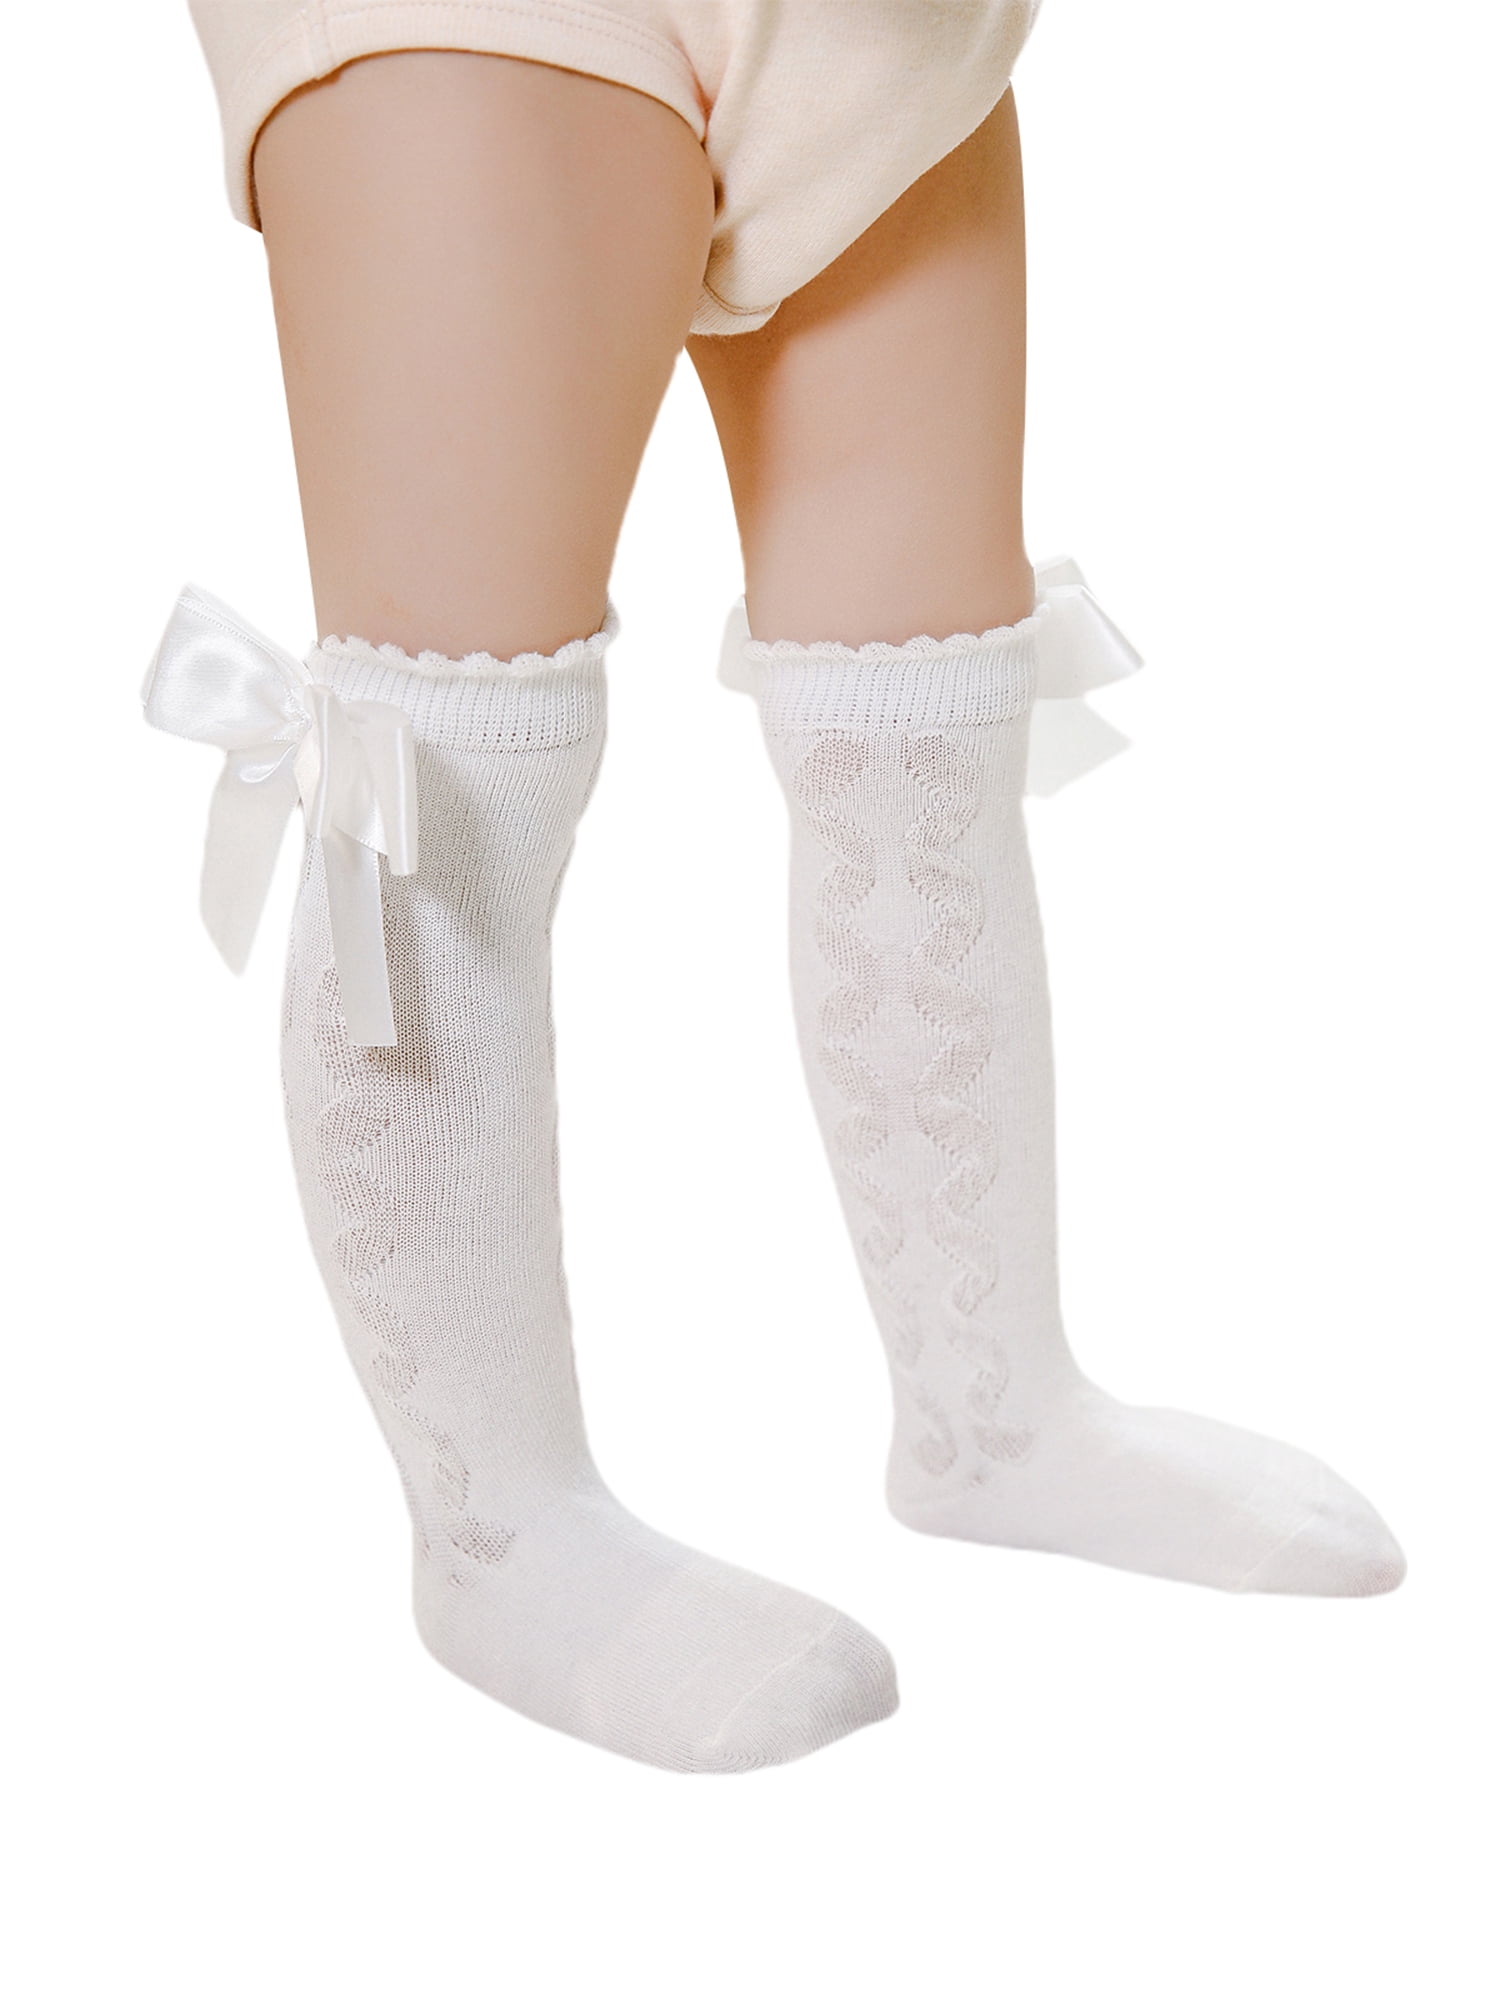 Newborn Baby Toddlers Cable Knit Knee High Socks Stocking for Boy and Girls